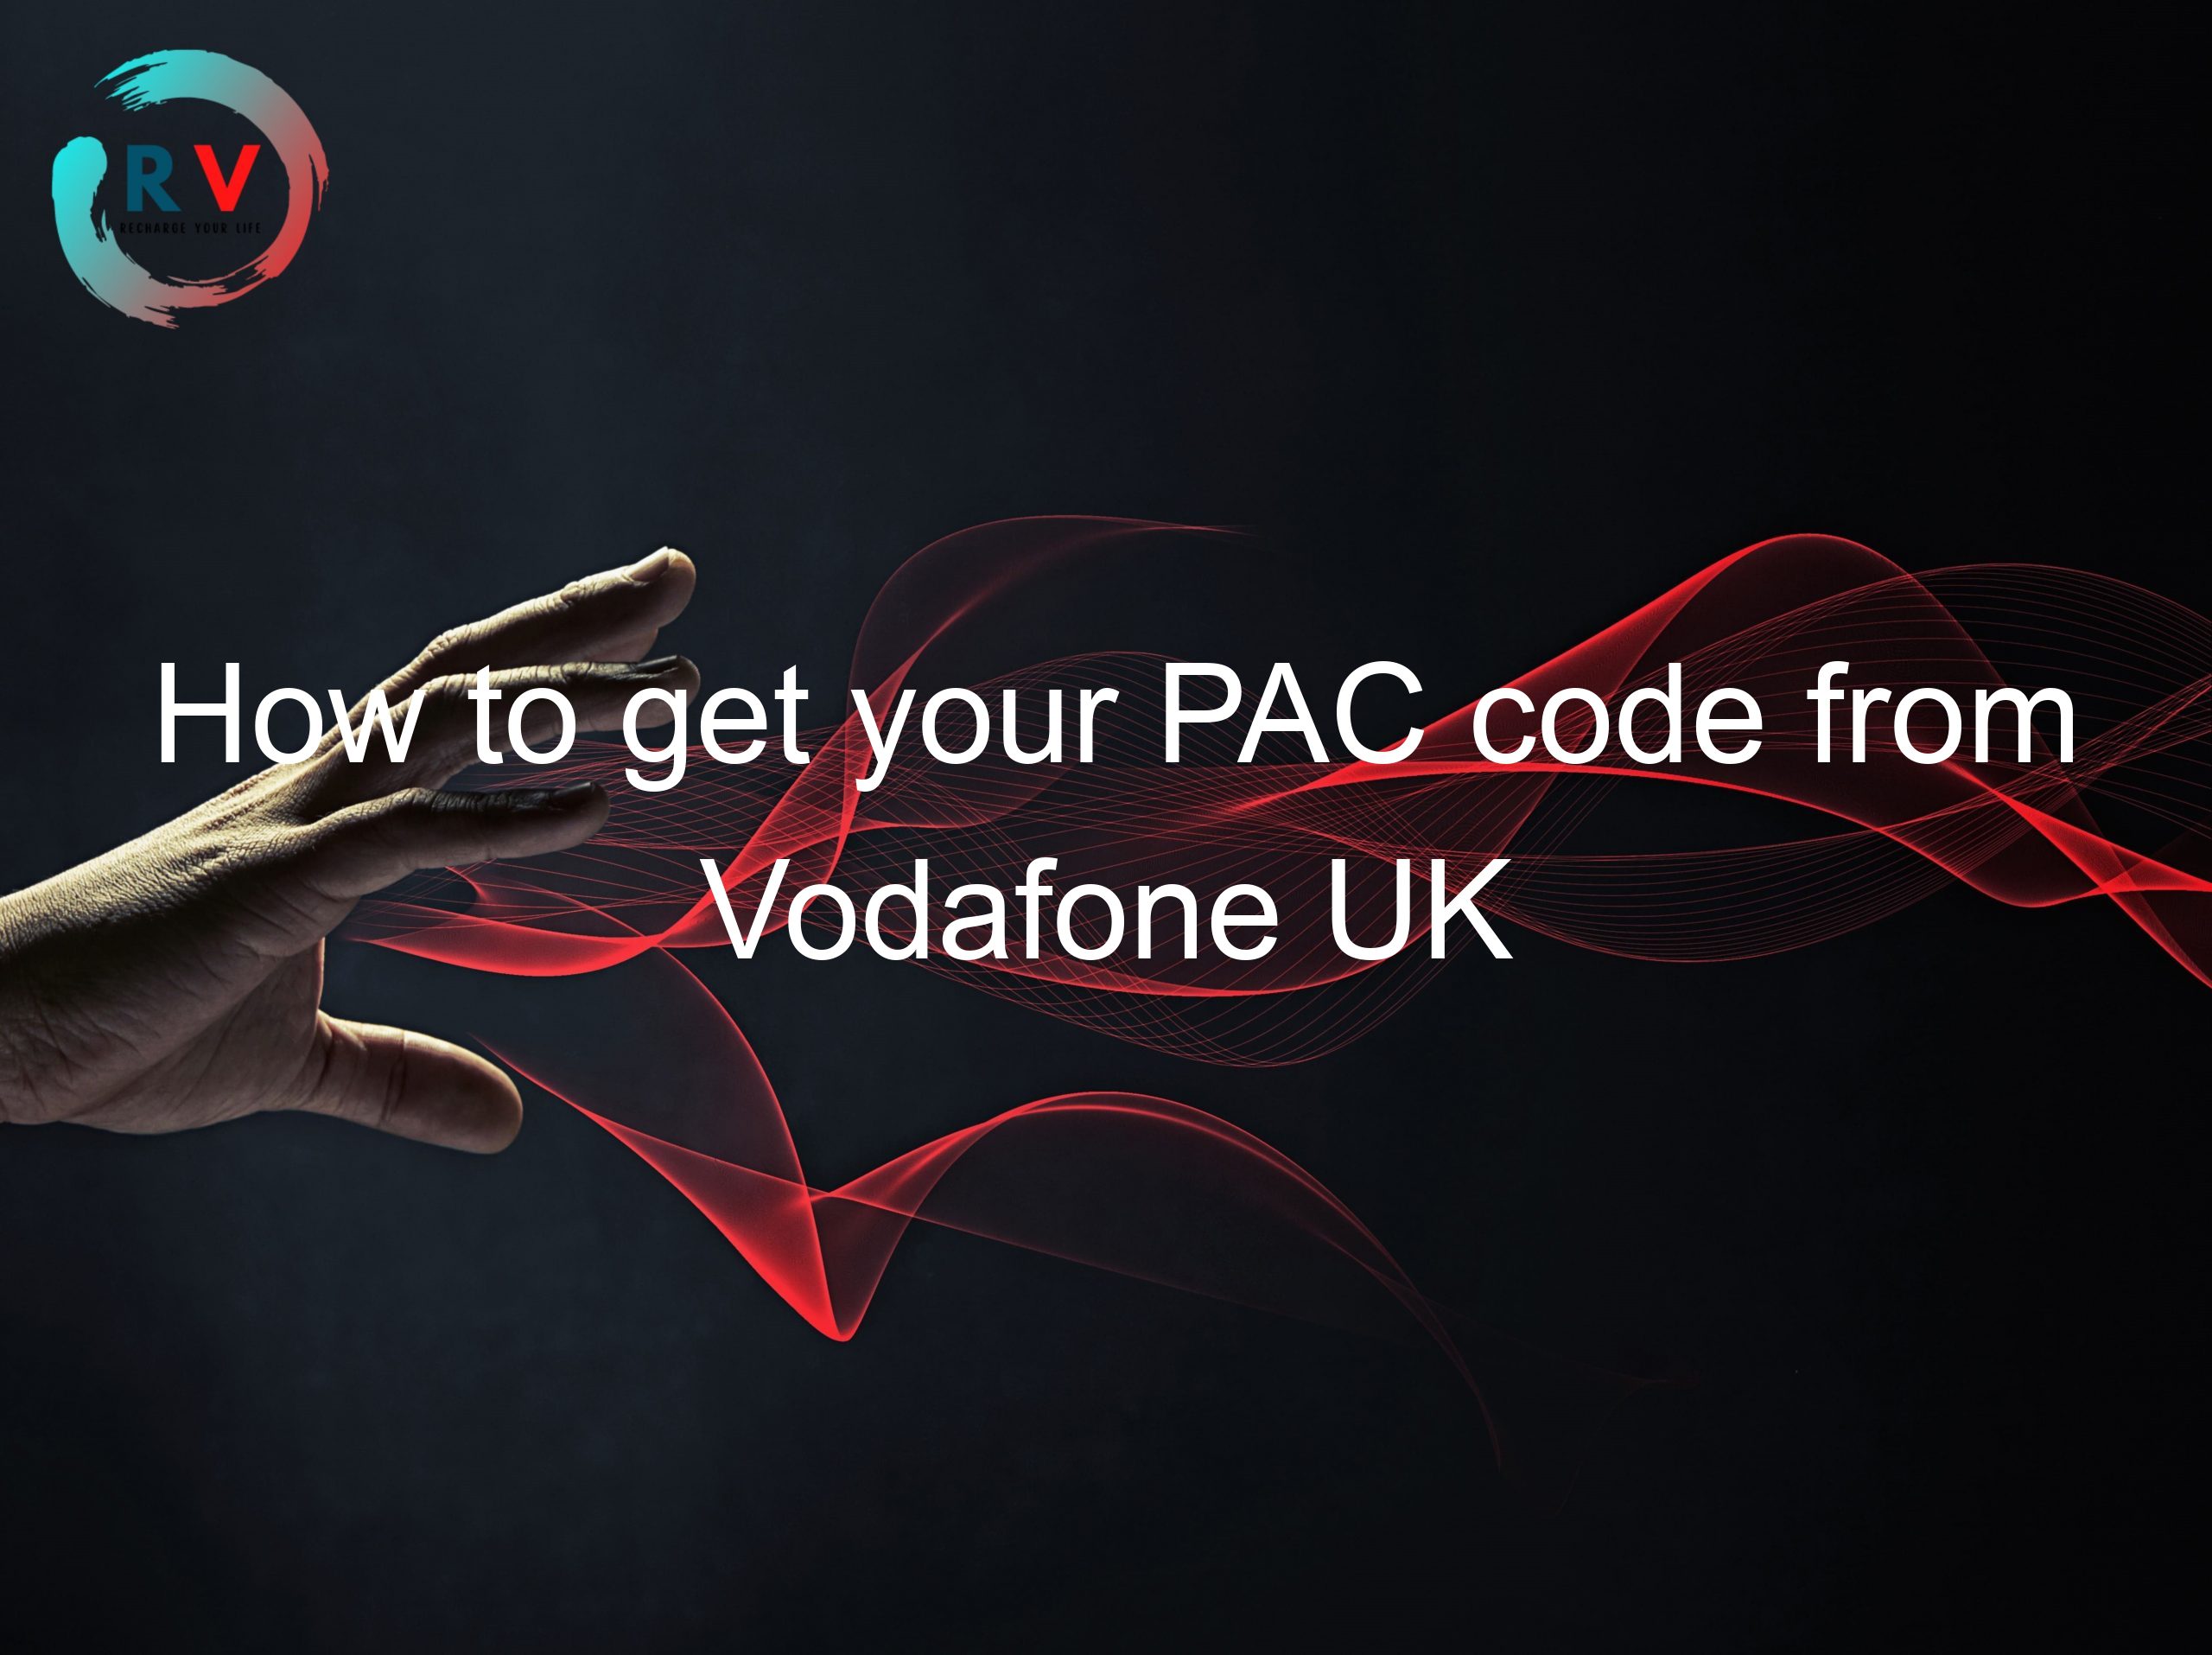 How to get your PAC code from Vodafone UK